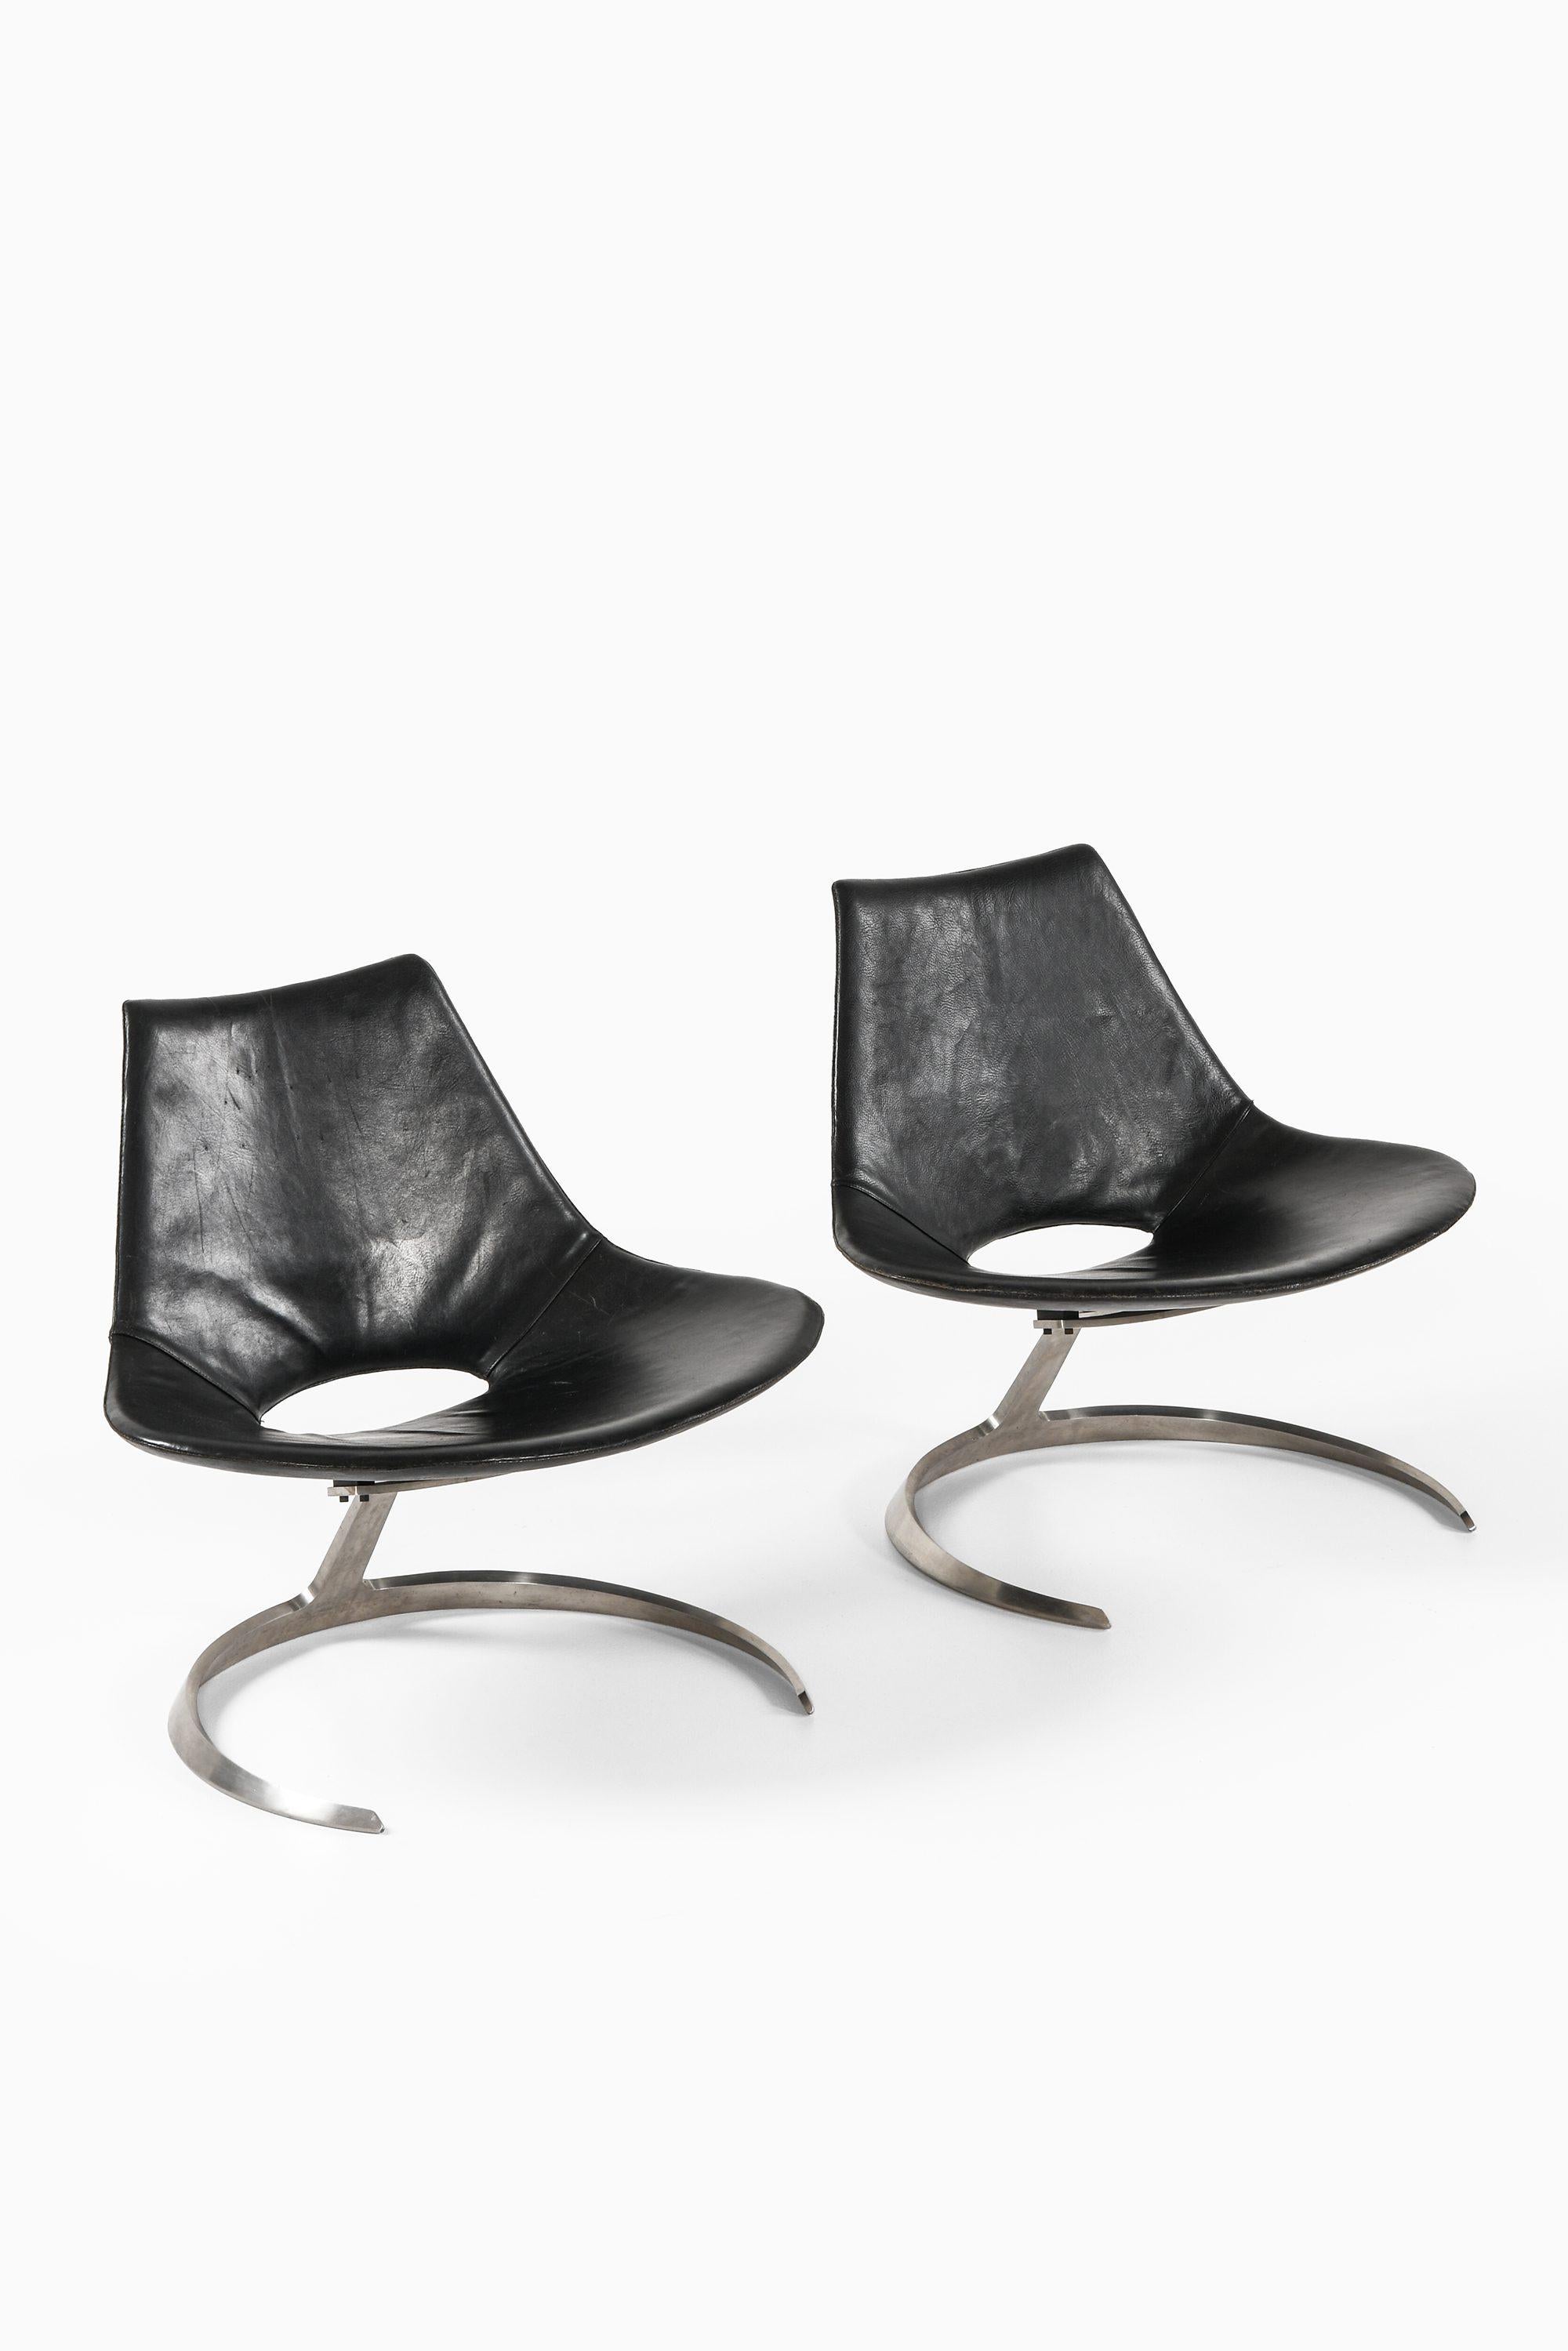 Pair of Easy Chairs in Original Black Leather with Steel Frame by Preben Fabricius and Jørgen Kastholm, 1962

Additional Information:
Material: Steel frame, original black leather
Style: Mid century, Scandinavian
Rare pair of easy chairs model